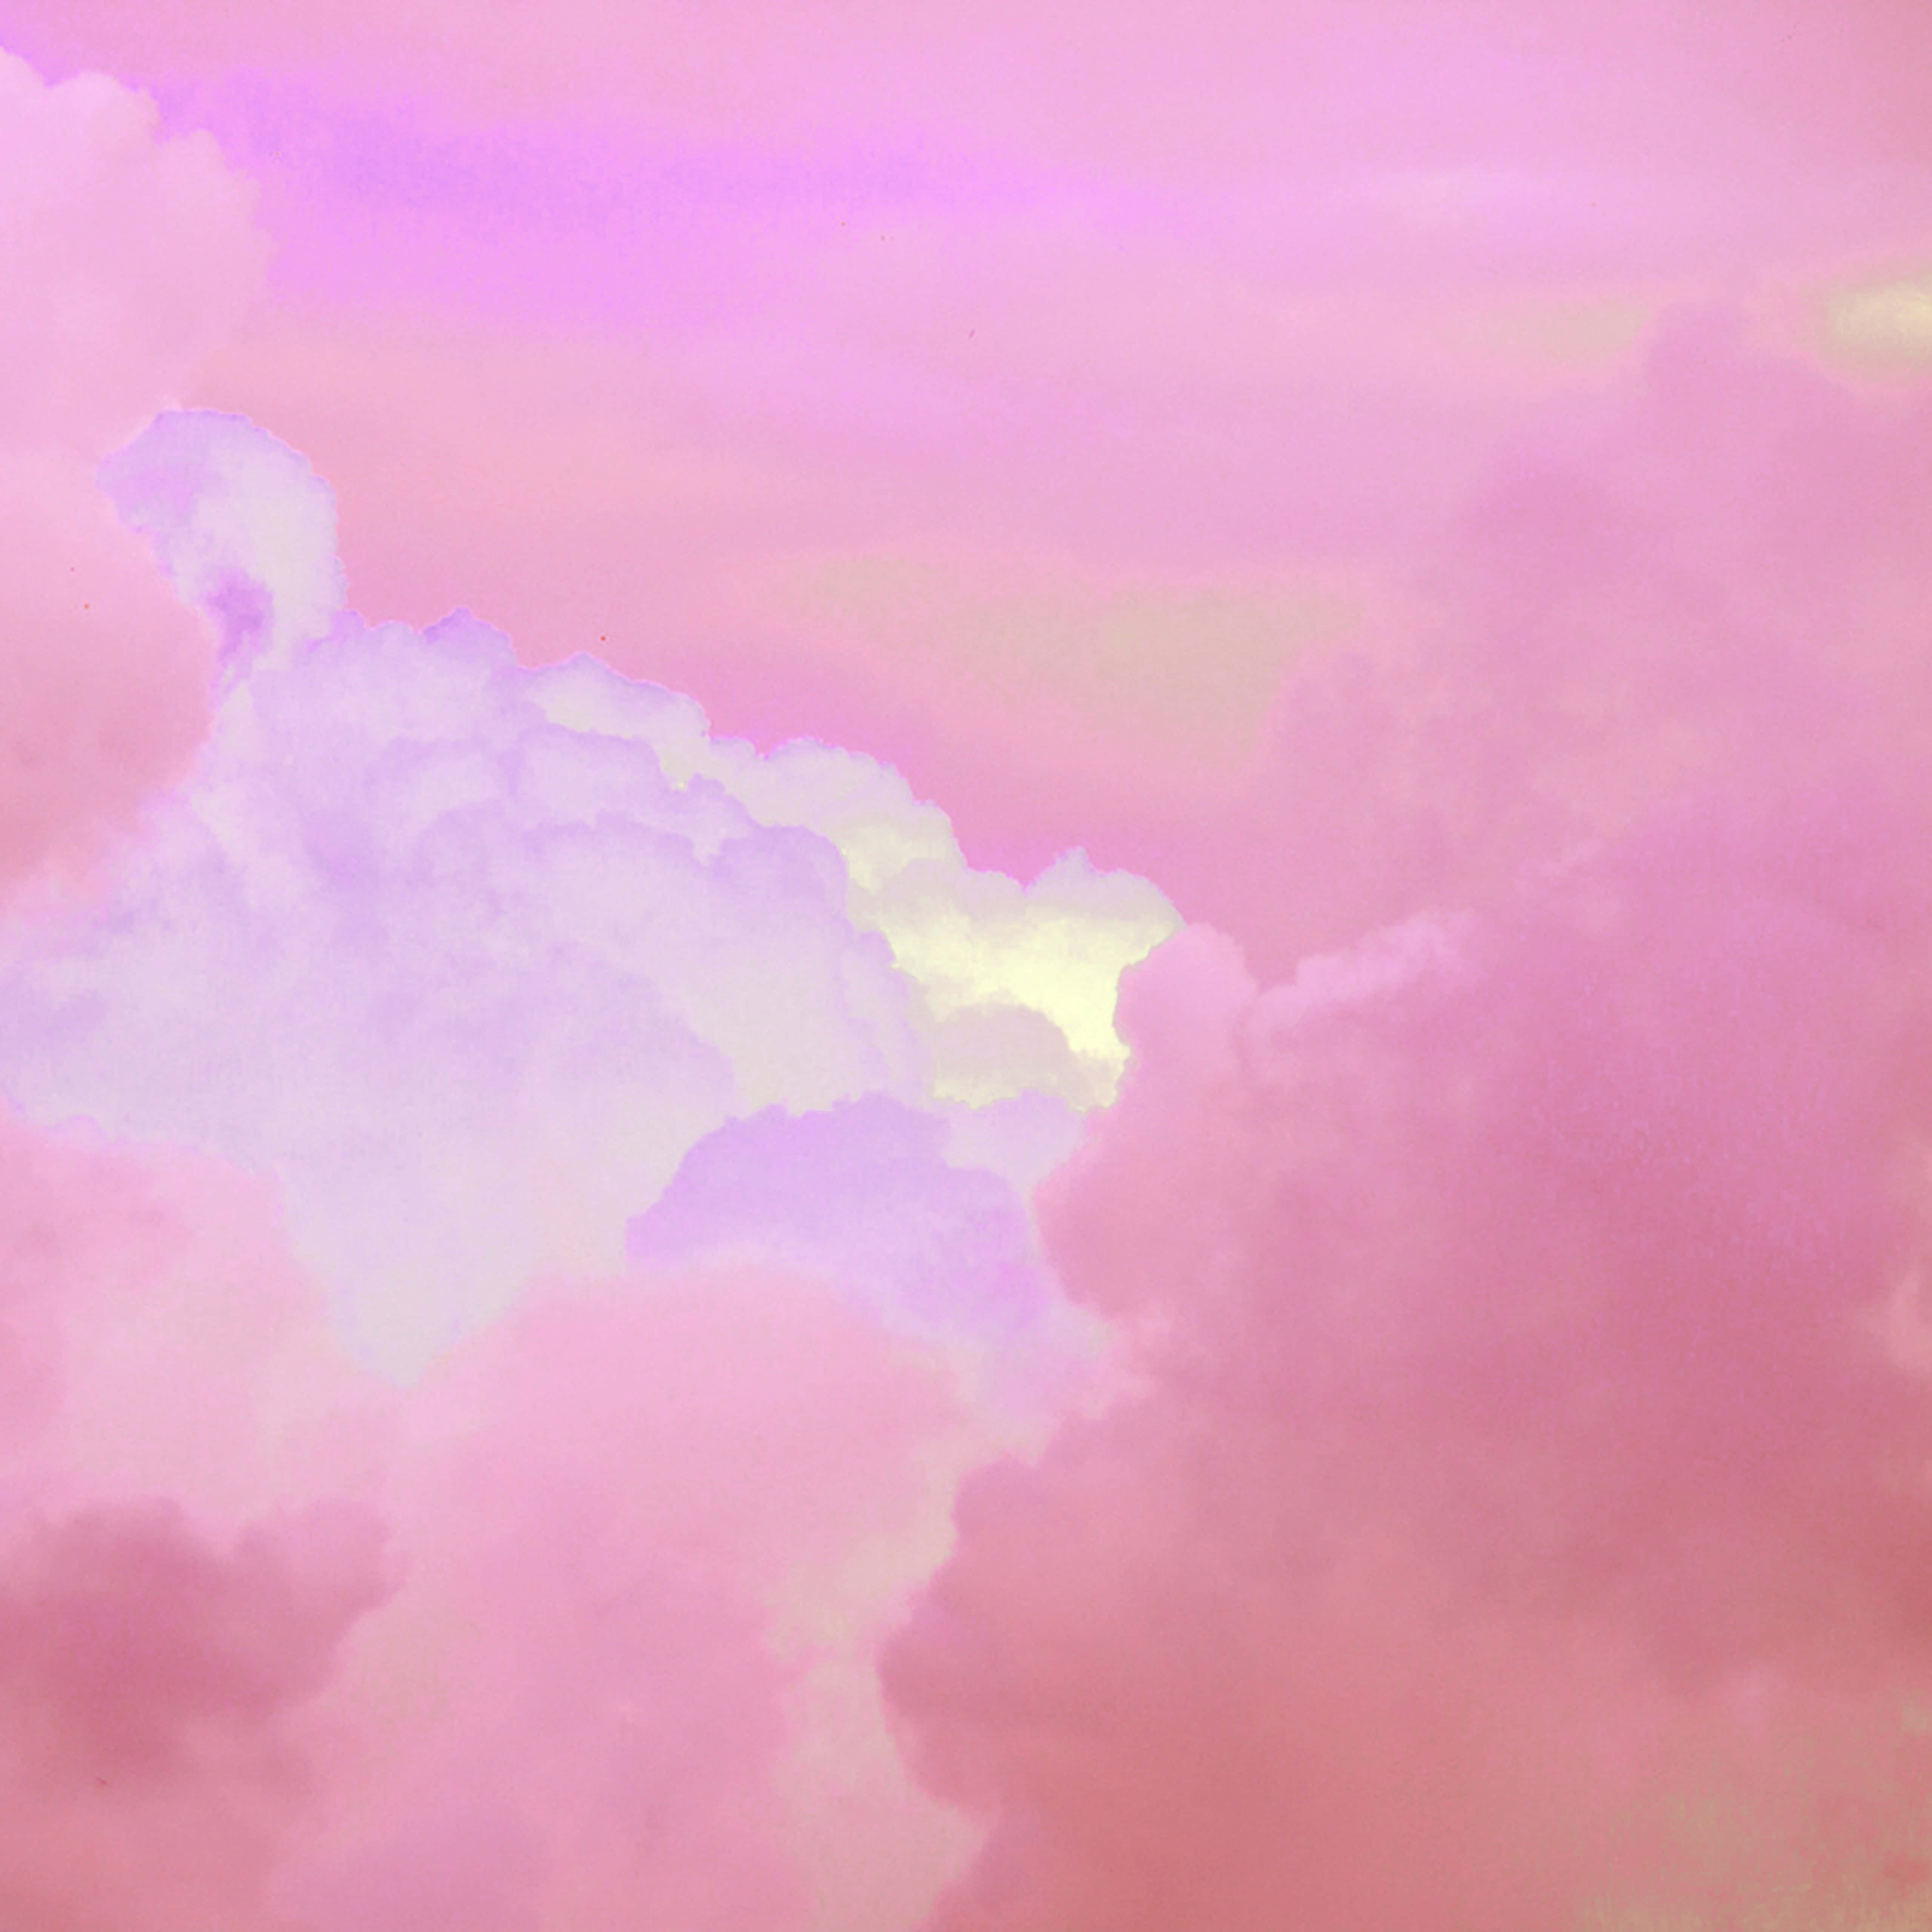 Pink Clouds In The Sky Wallpaper